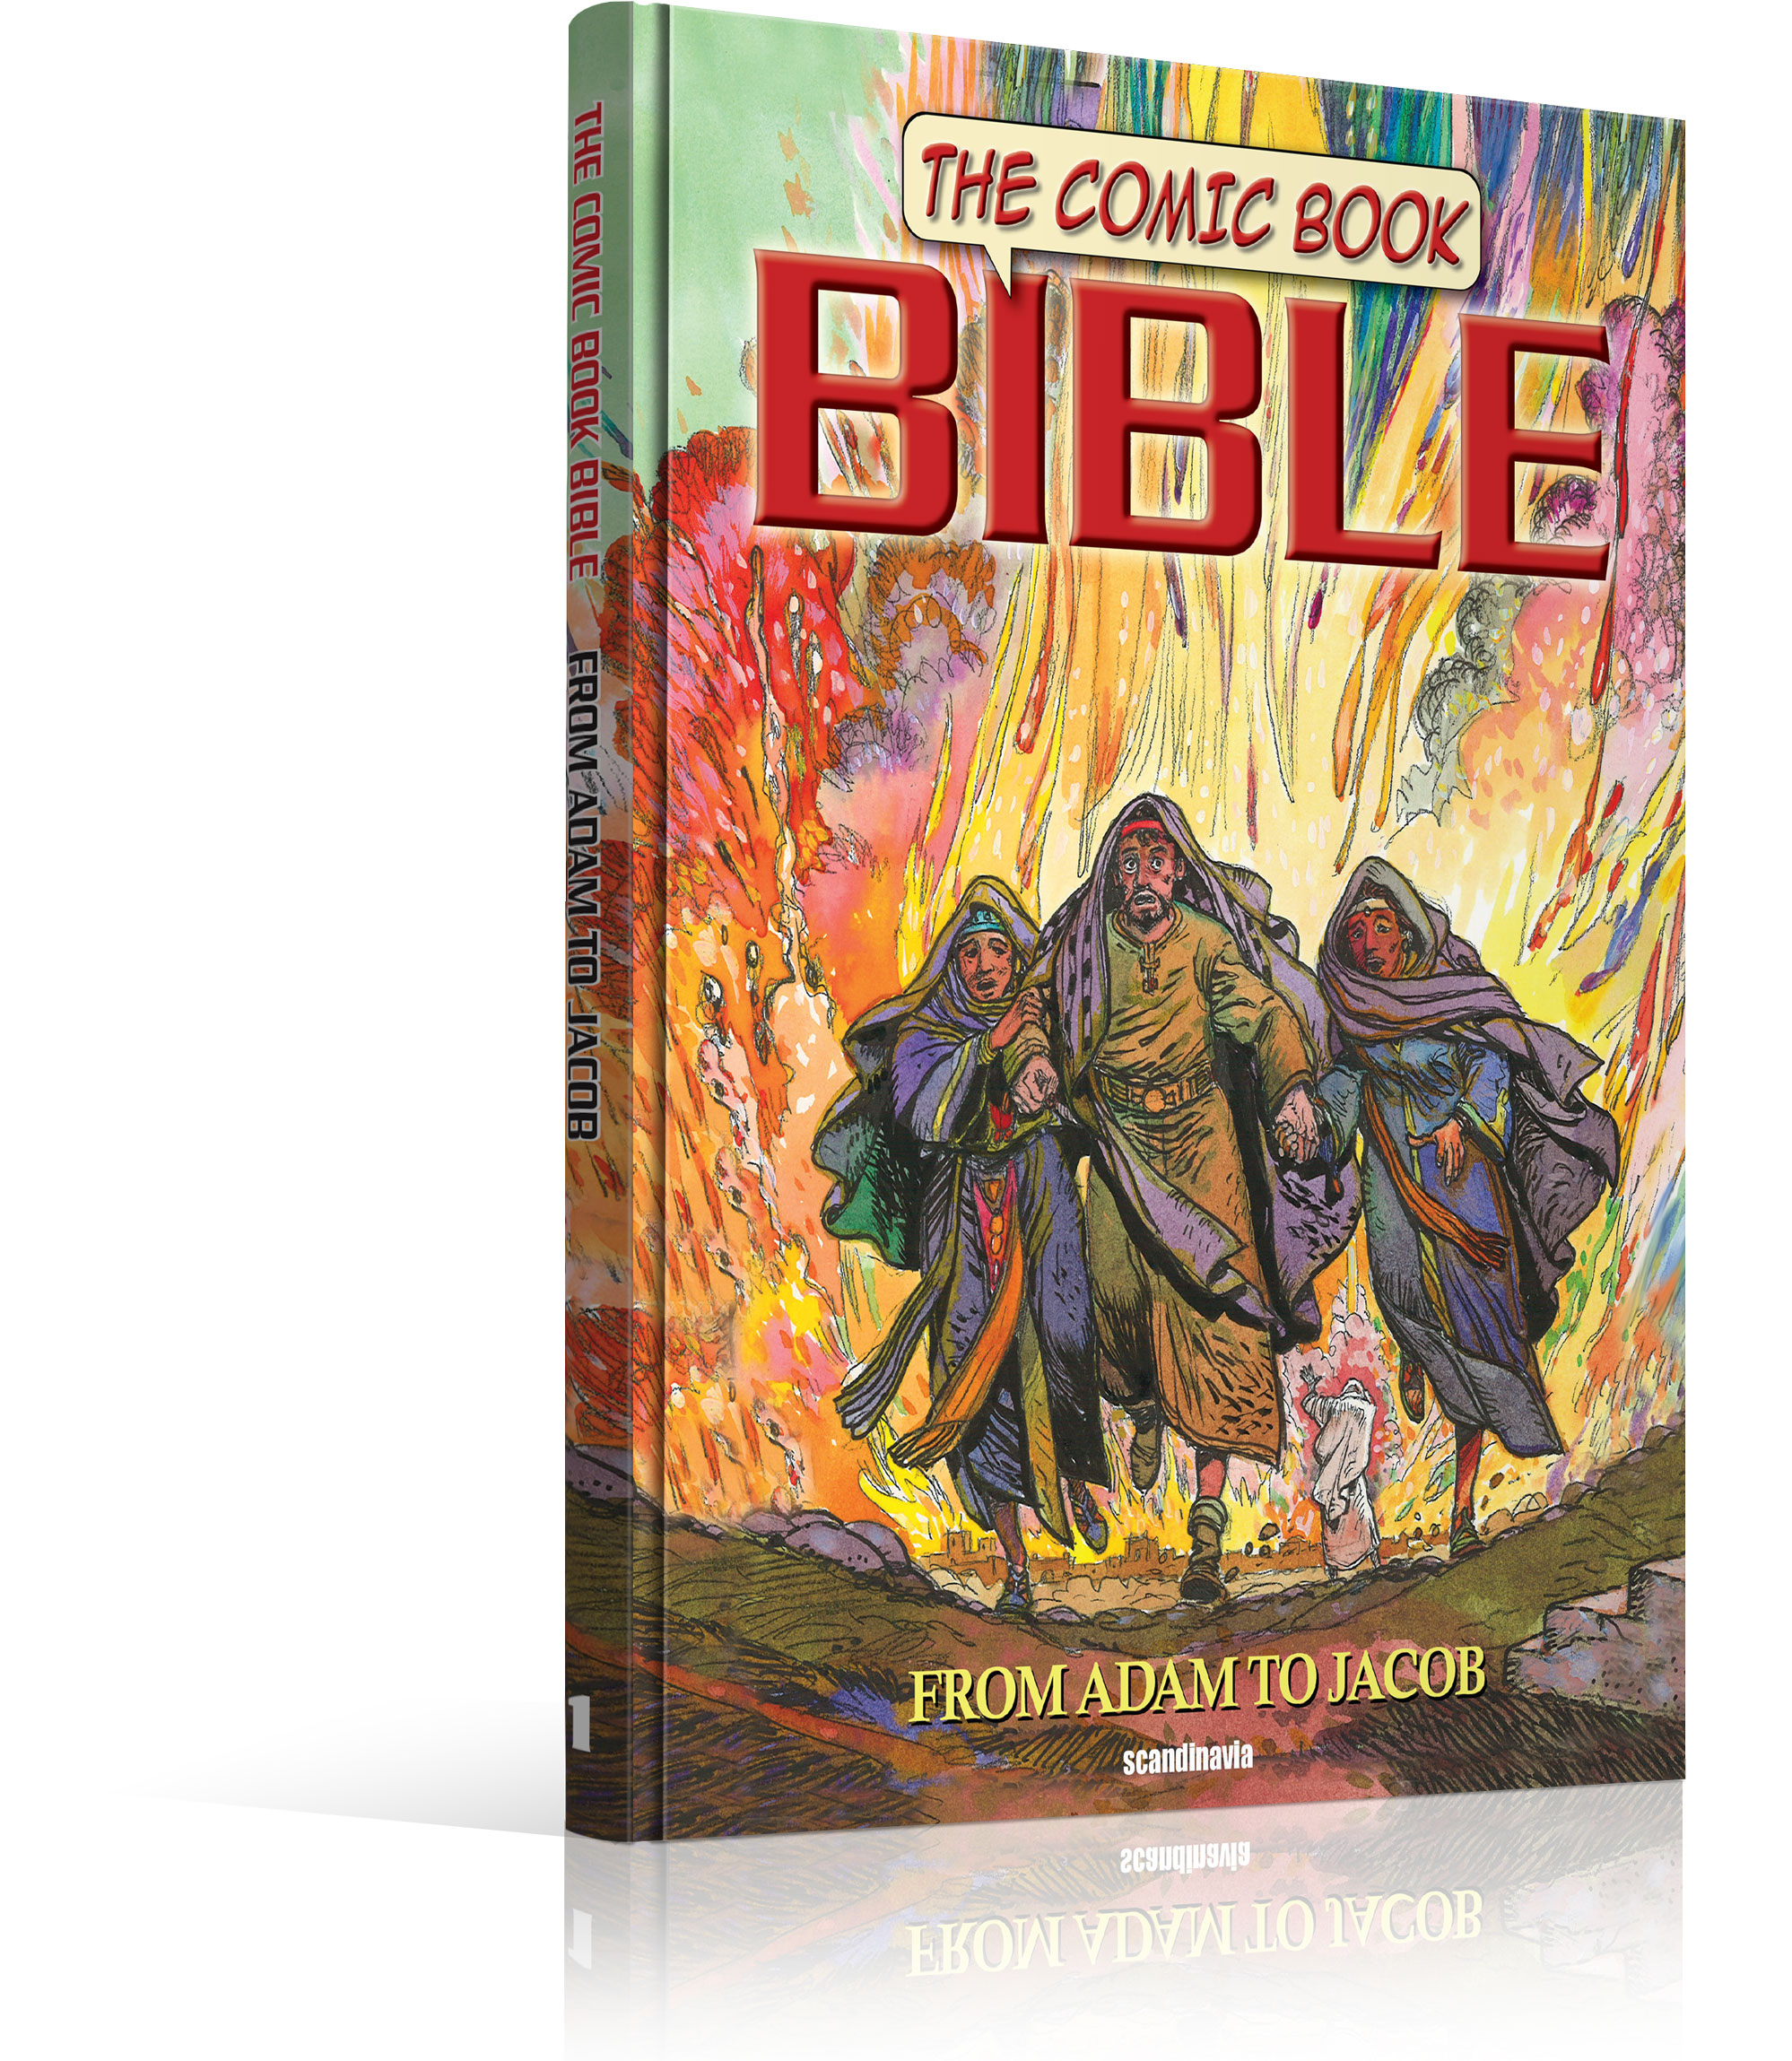 The Comic Book Bible Series - Sph.as